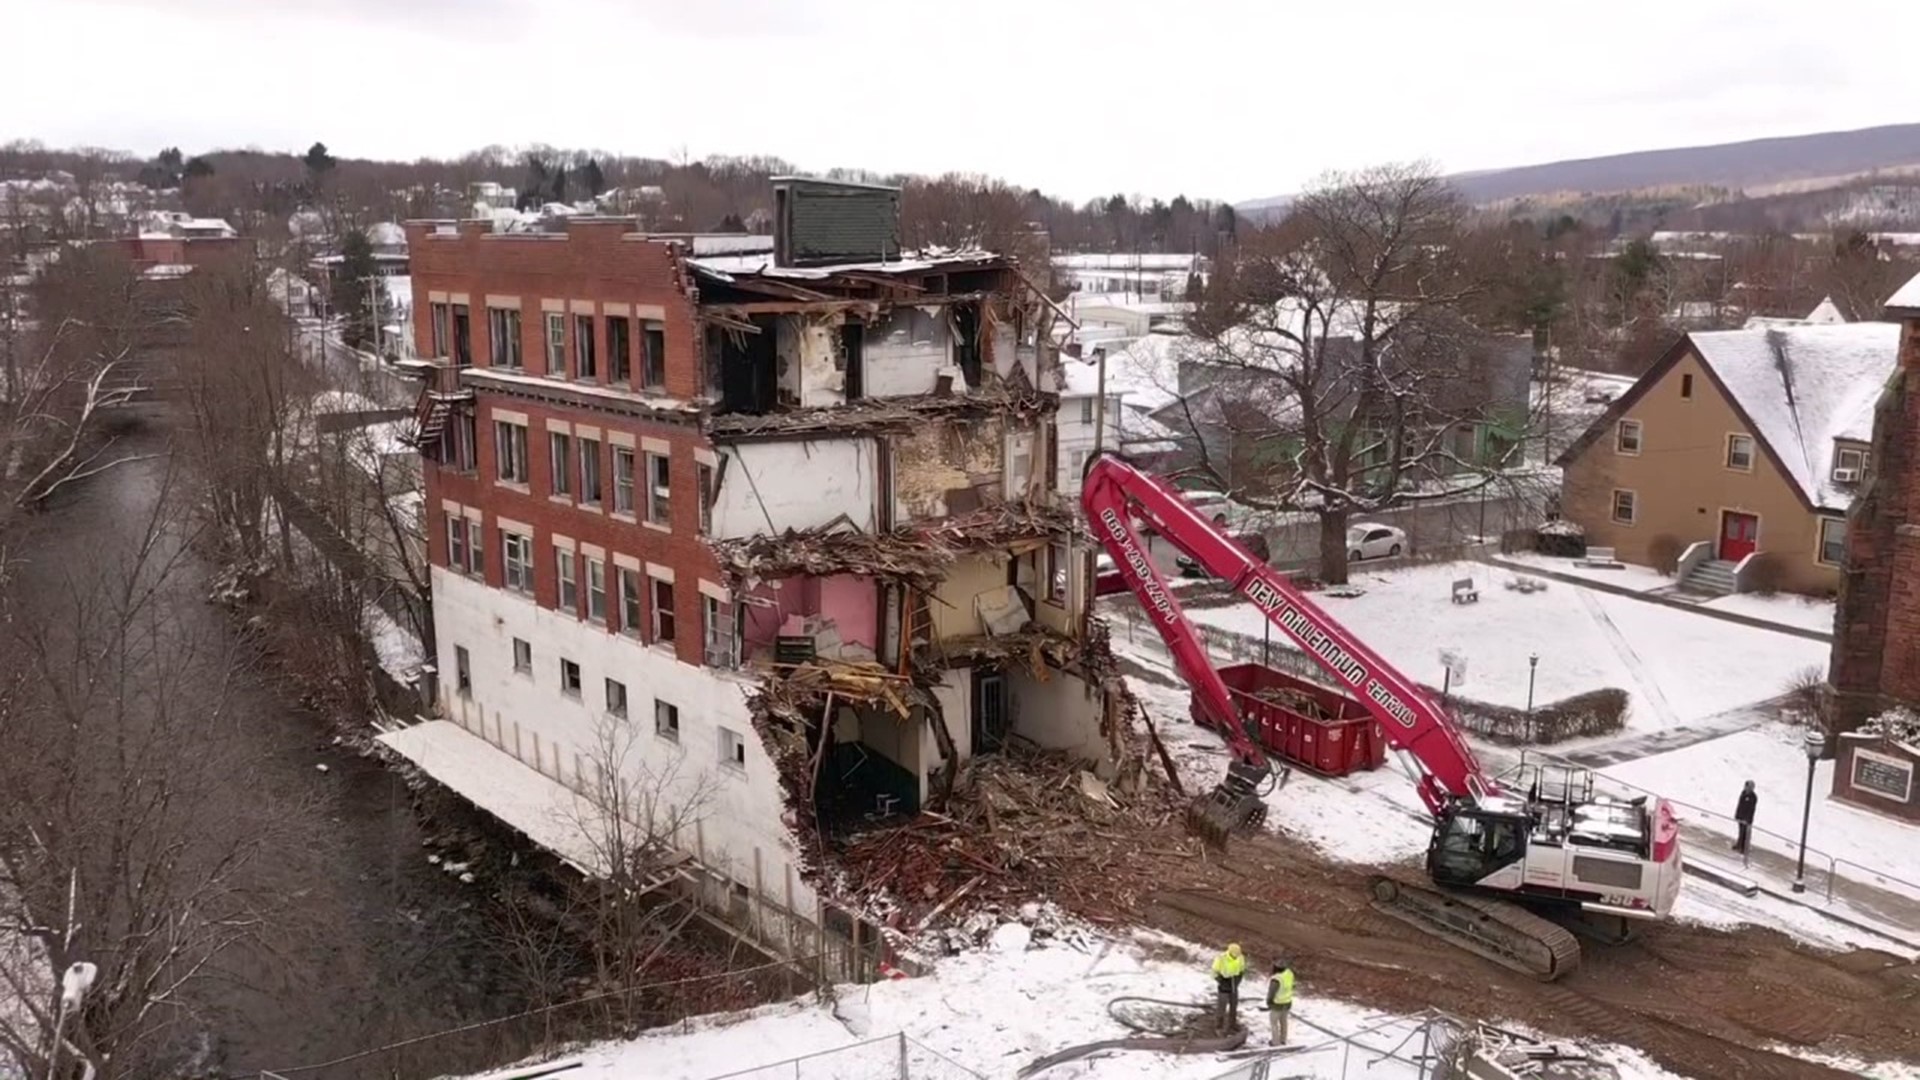 A building more than 100 years old is coming down in one Lackawanna County community, along with plenty of history.